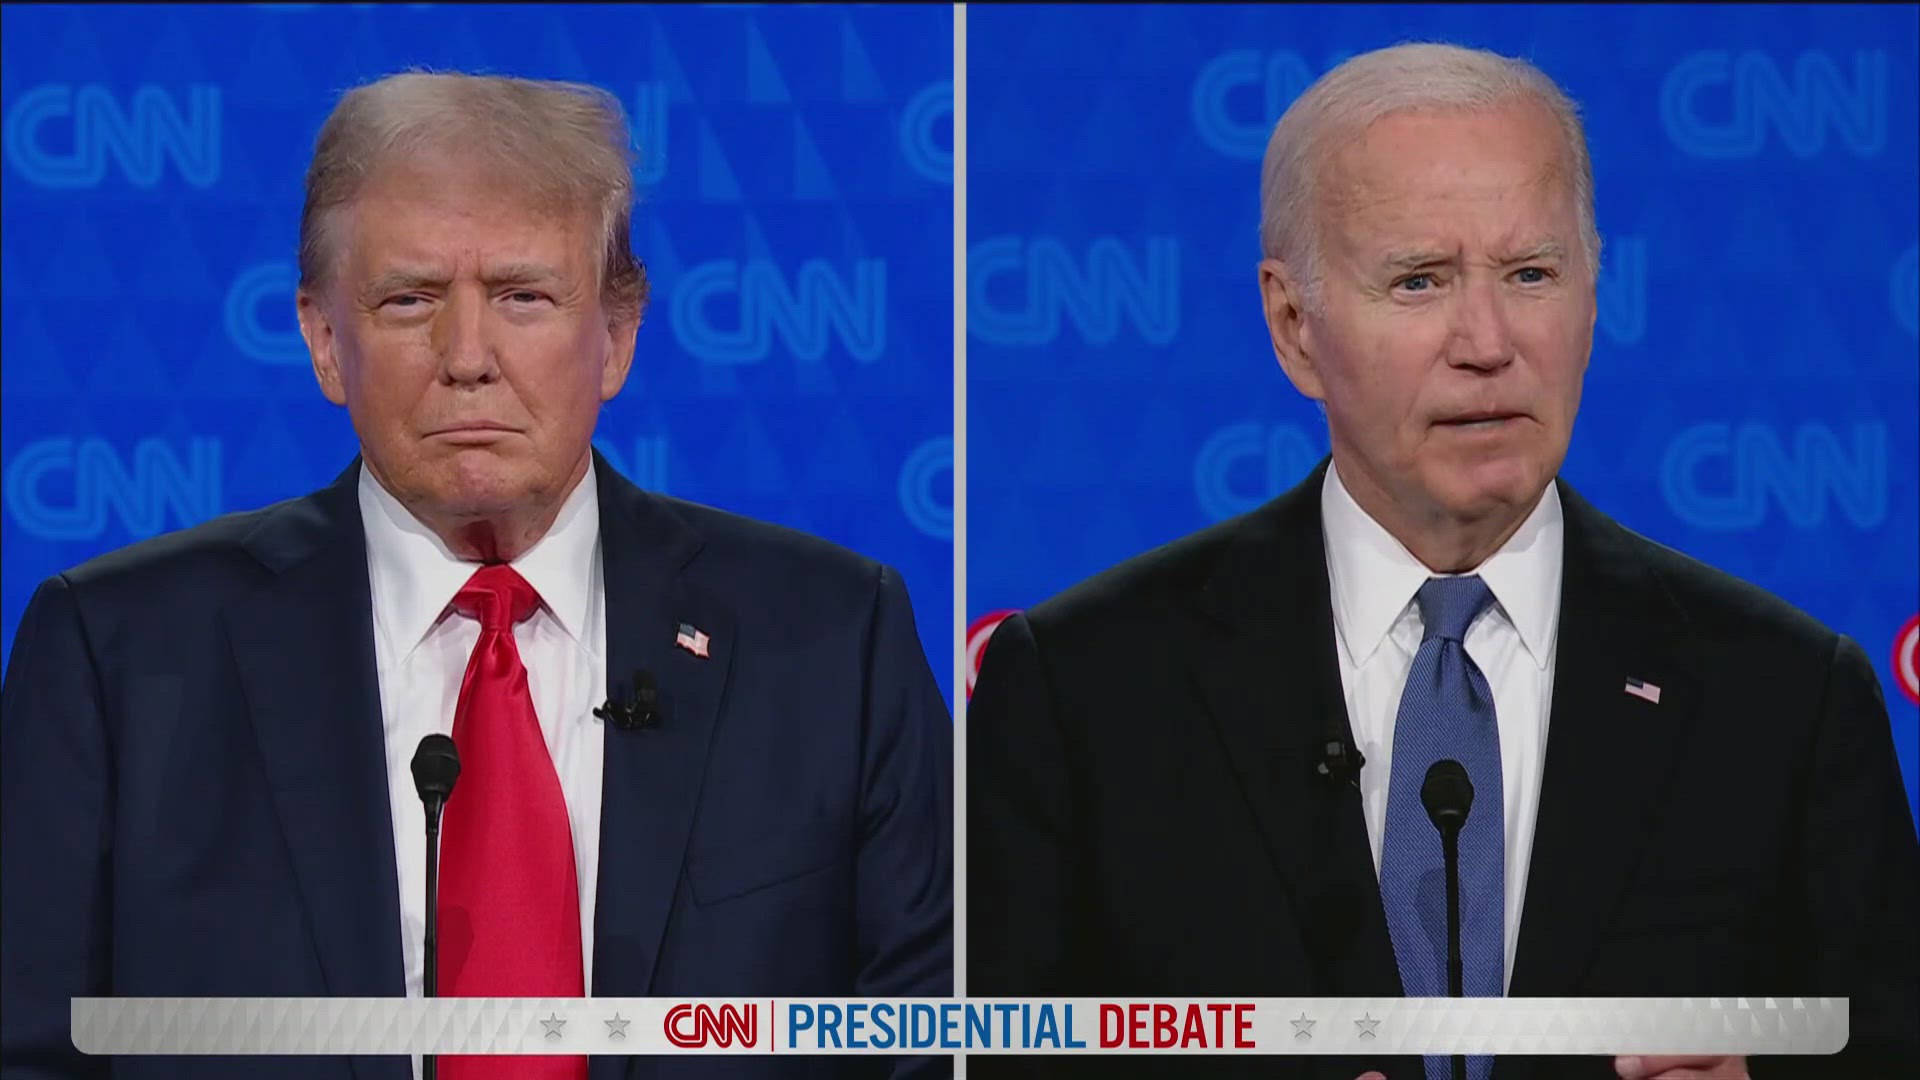 The Verify team fact checks claims from both Joe Biden and Donald Trump as they referenced unemployment and inflation.